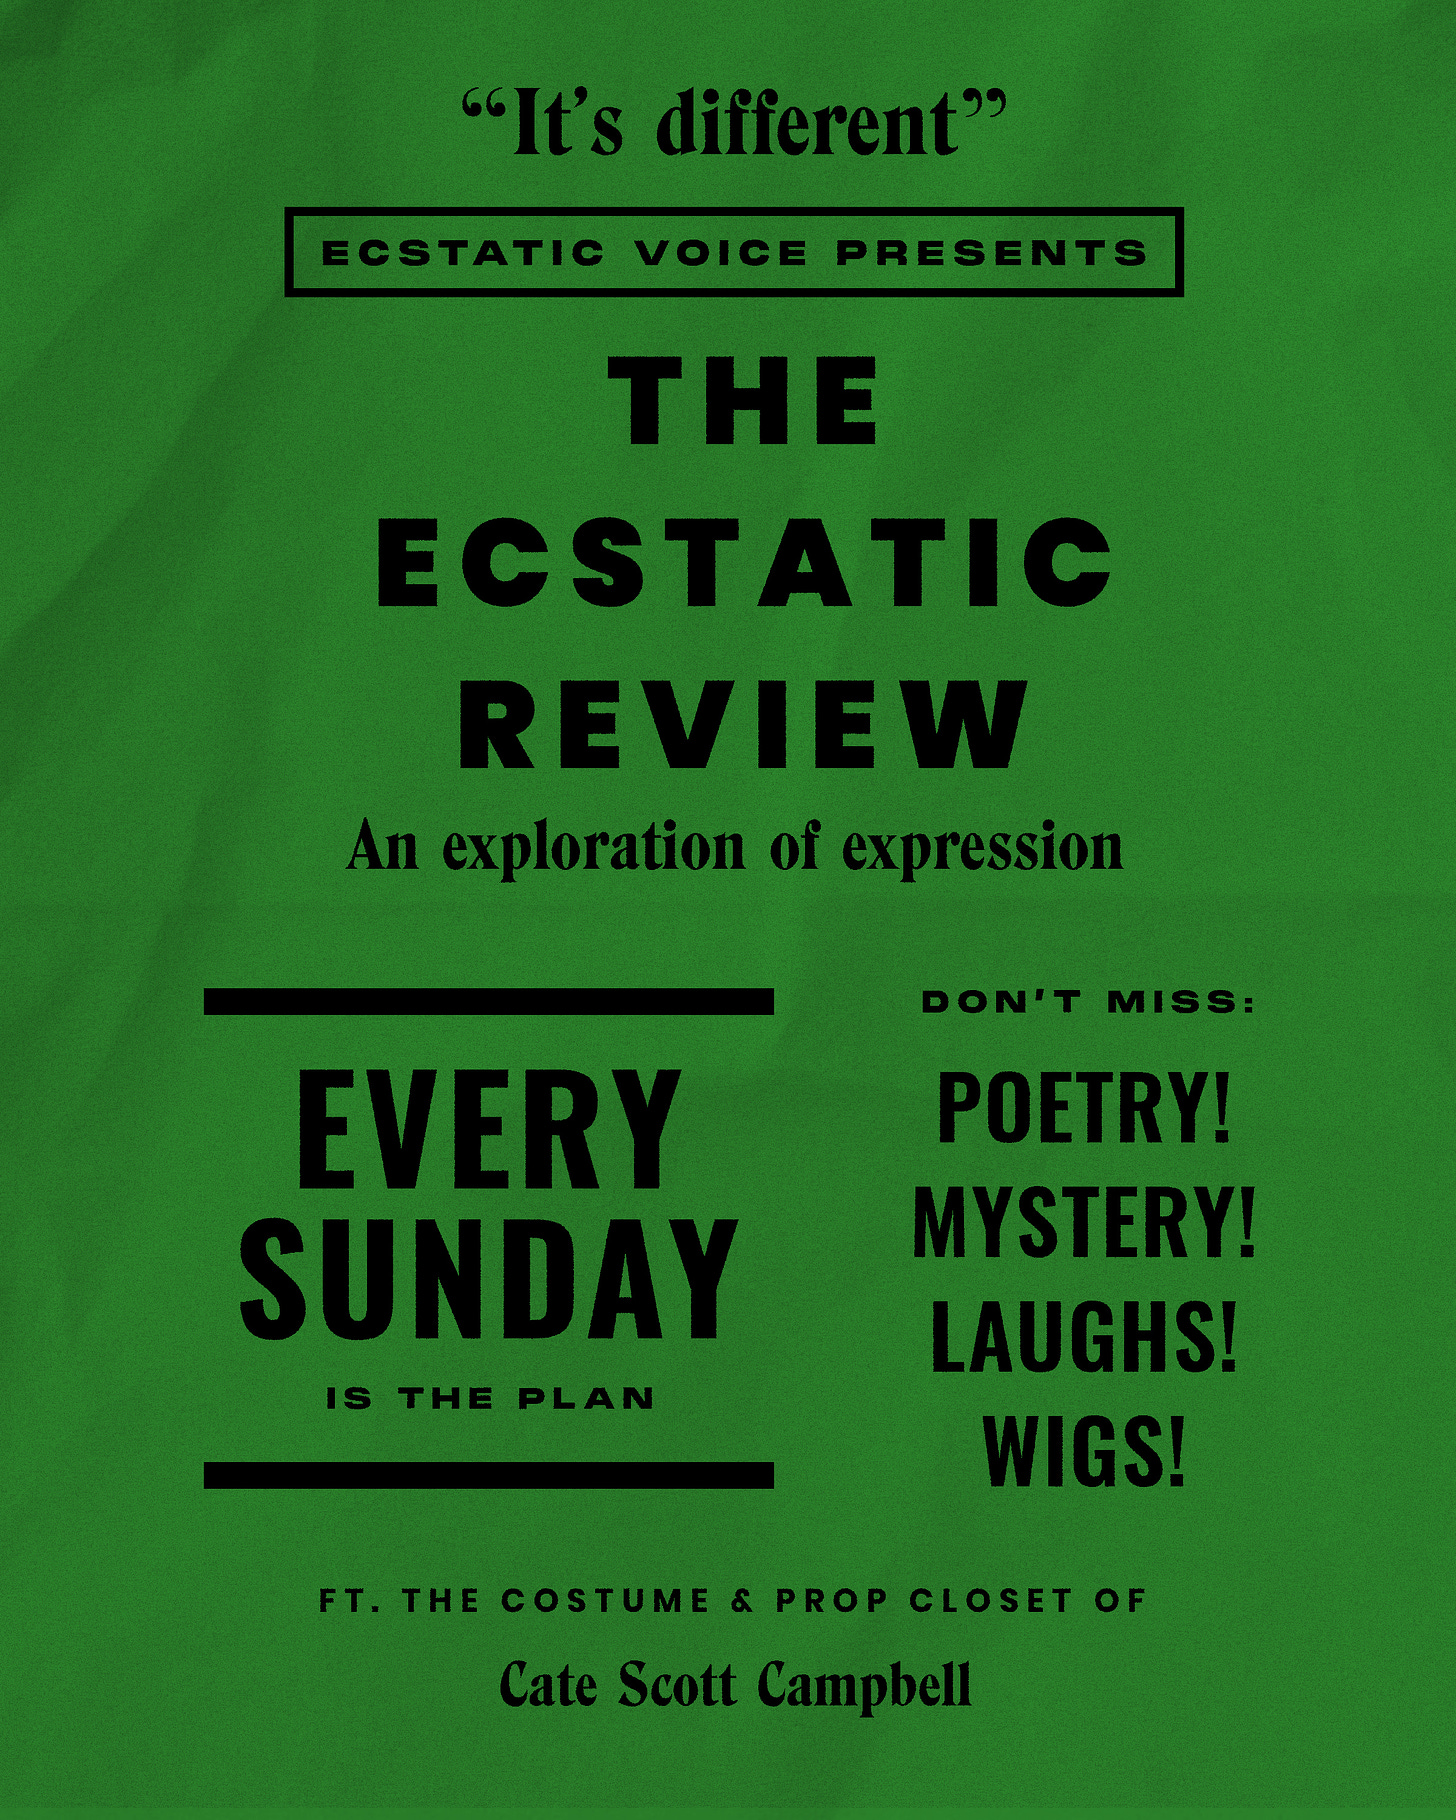 The Ecstatic Review Playbill 4